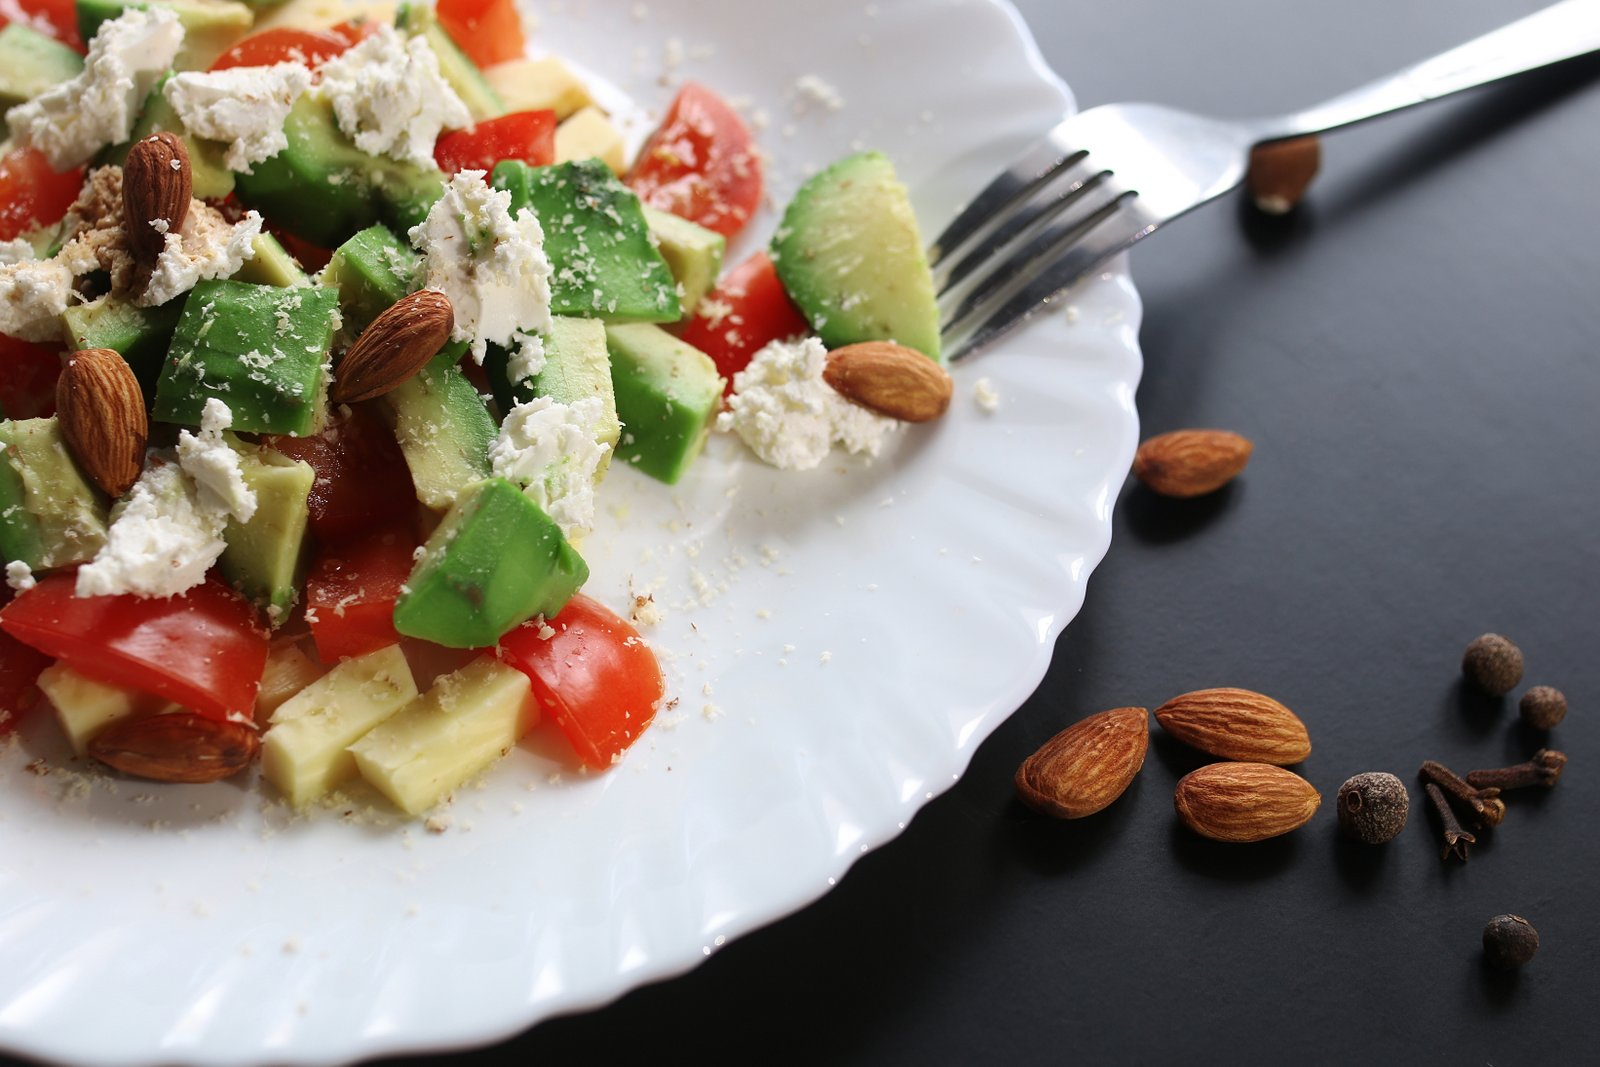 Avocado And Almond Salad Recipe With Feta Cheese